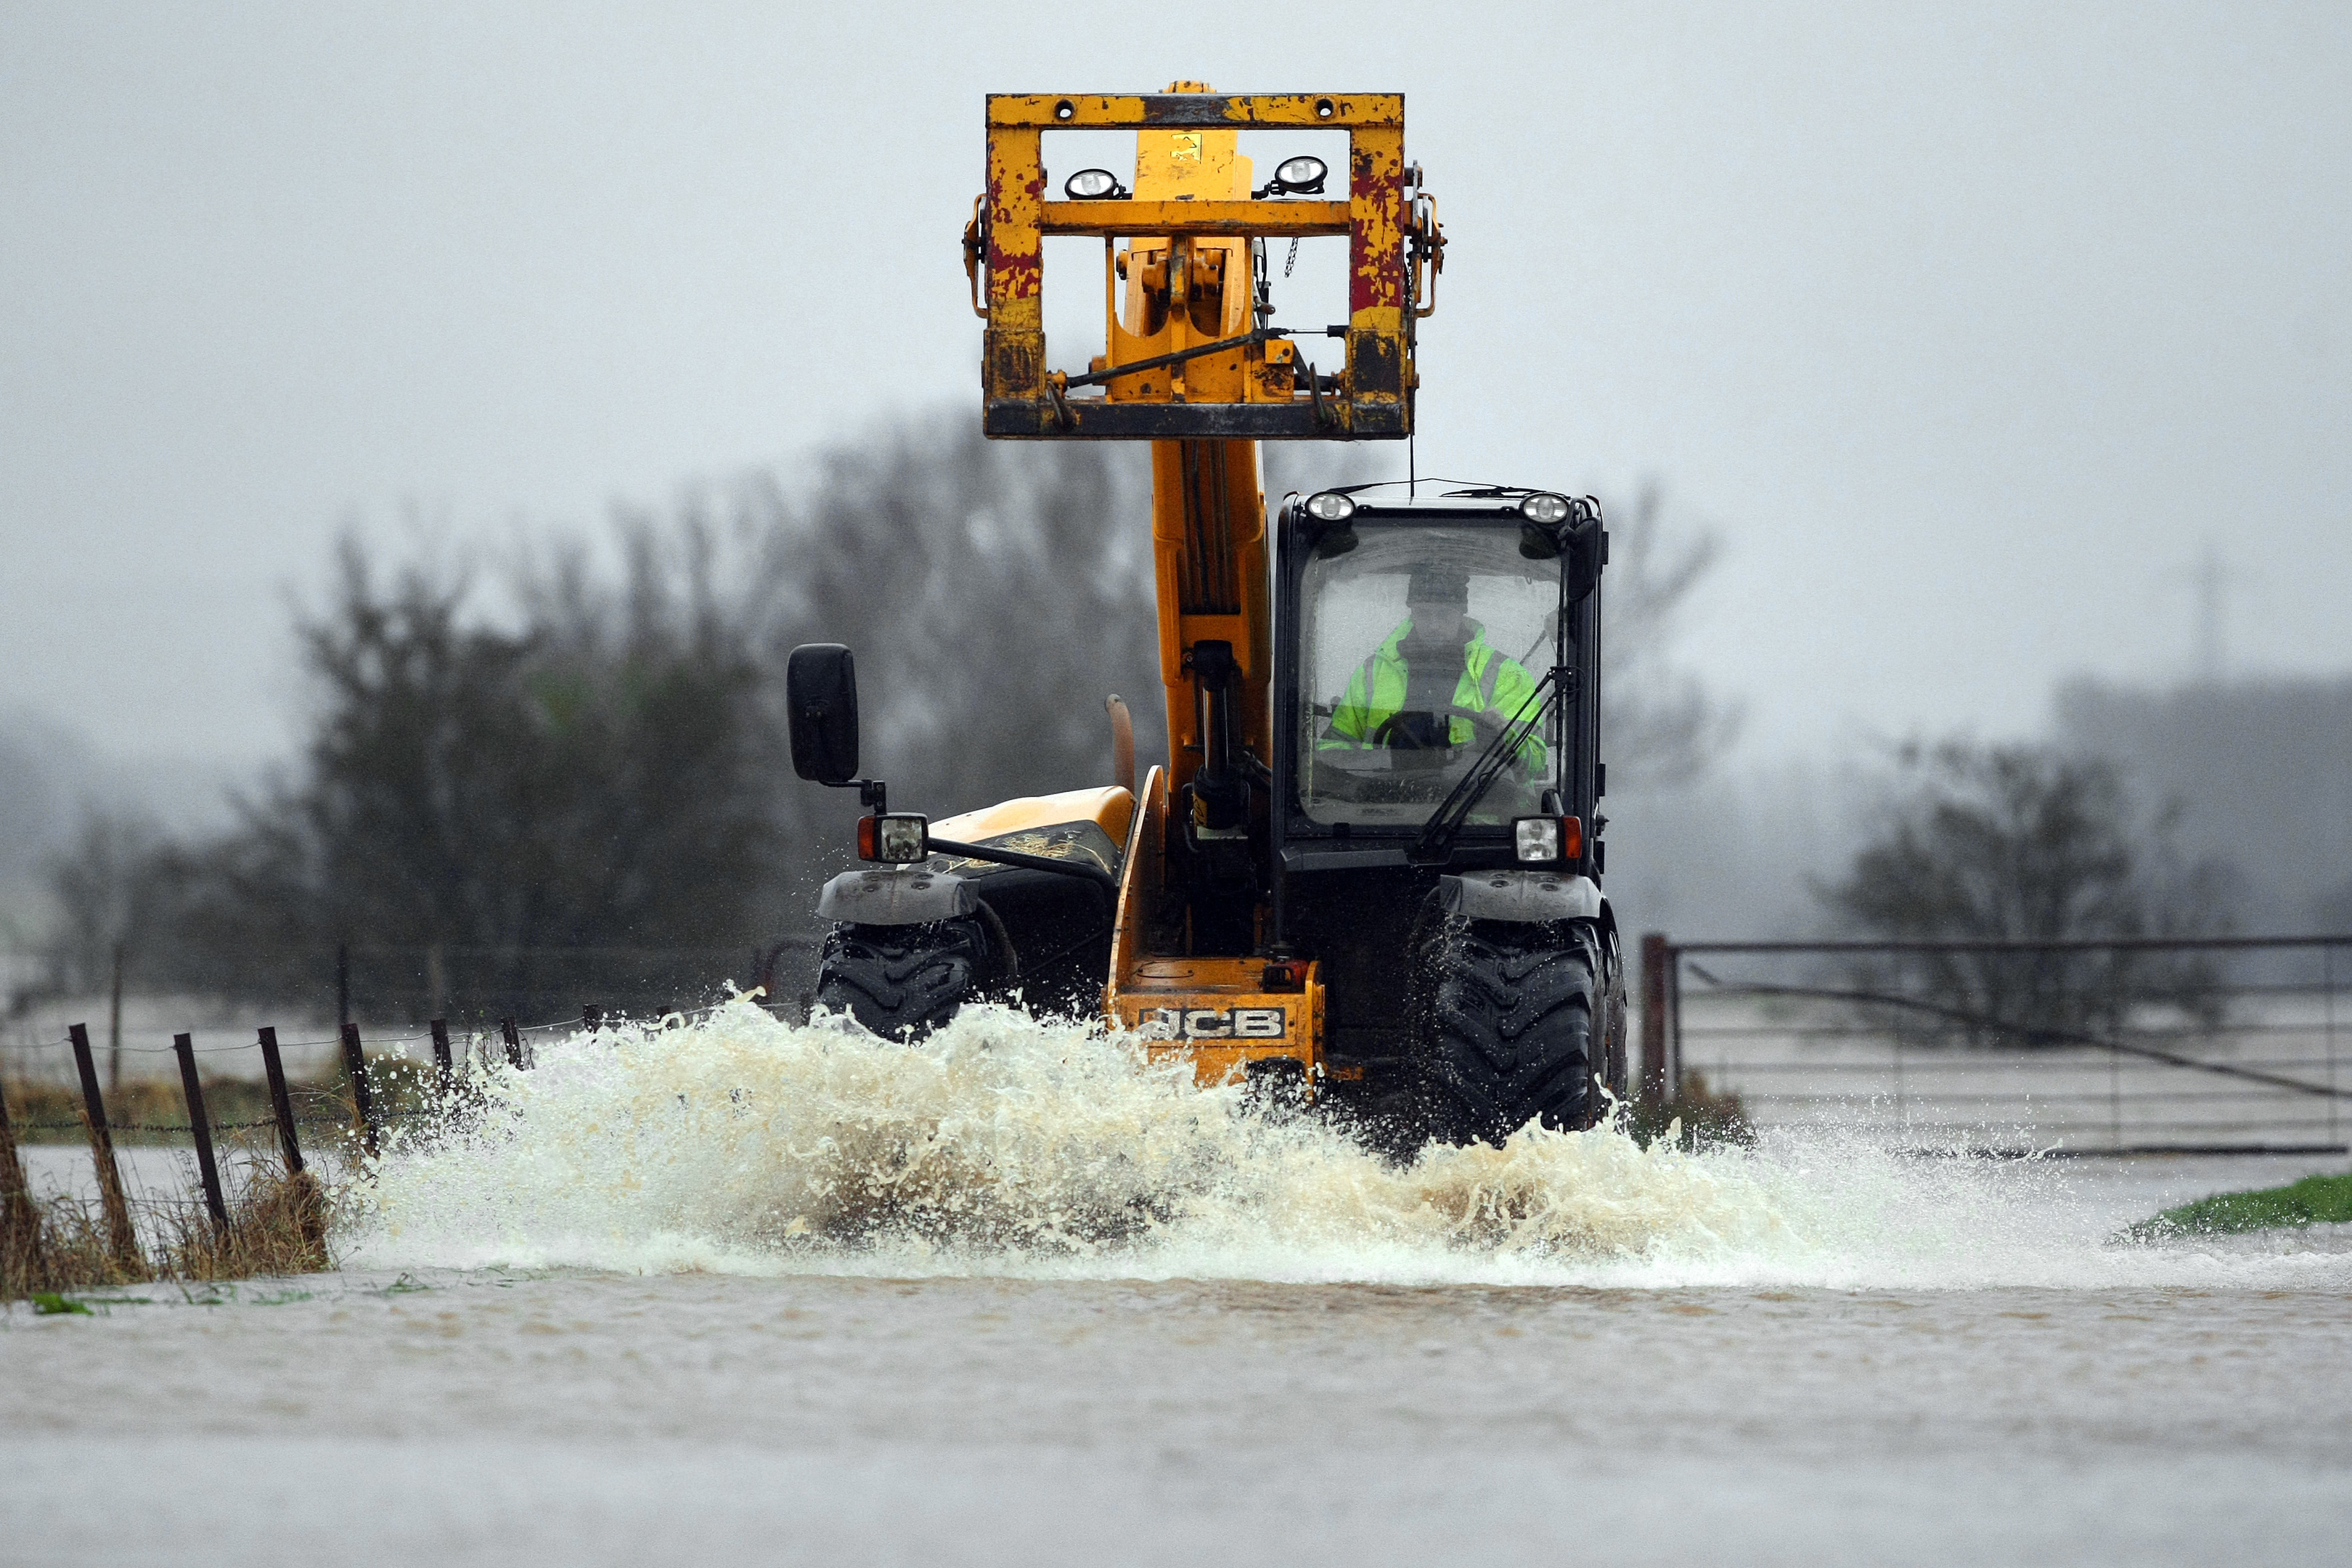 Farmers near Blairgowrie saw hundreds of acres disappear under water